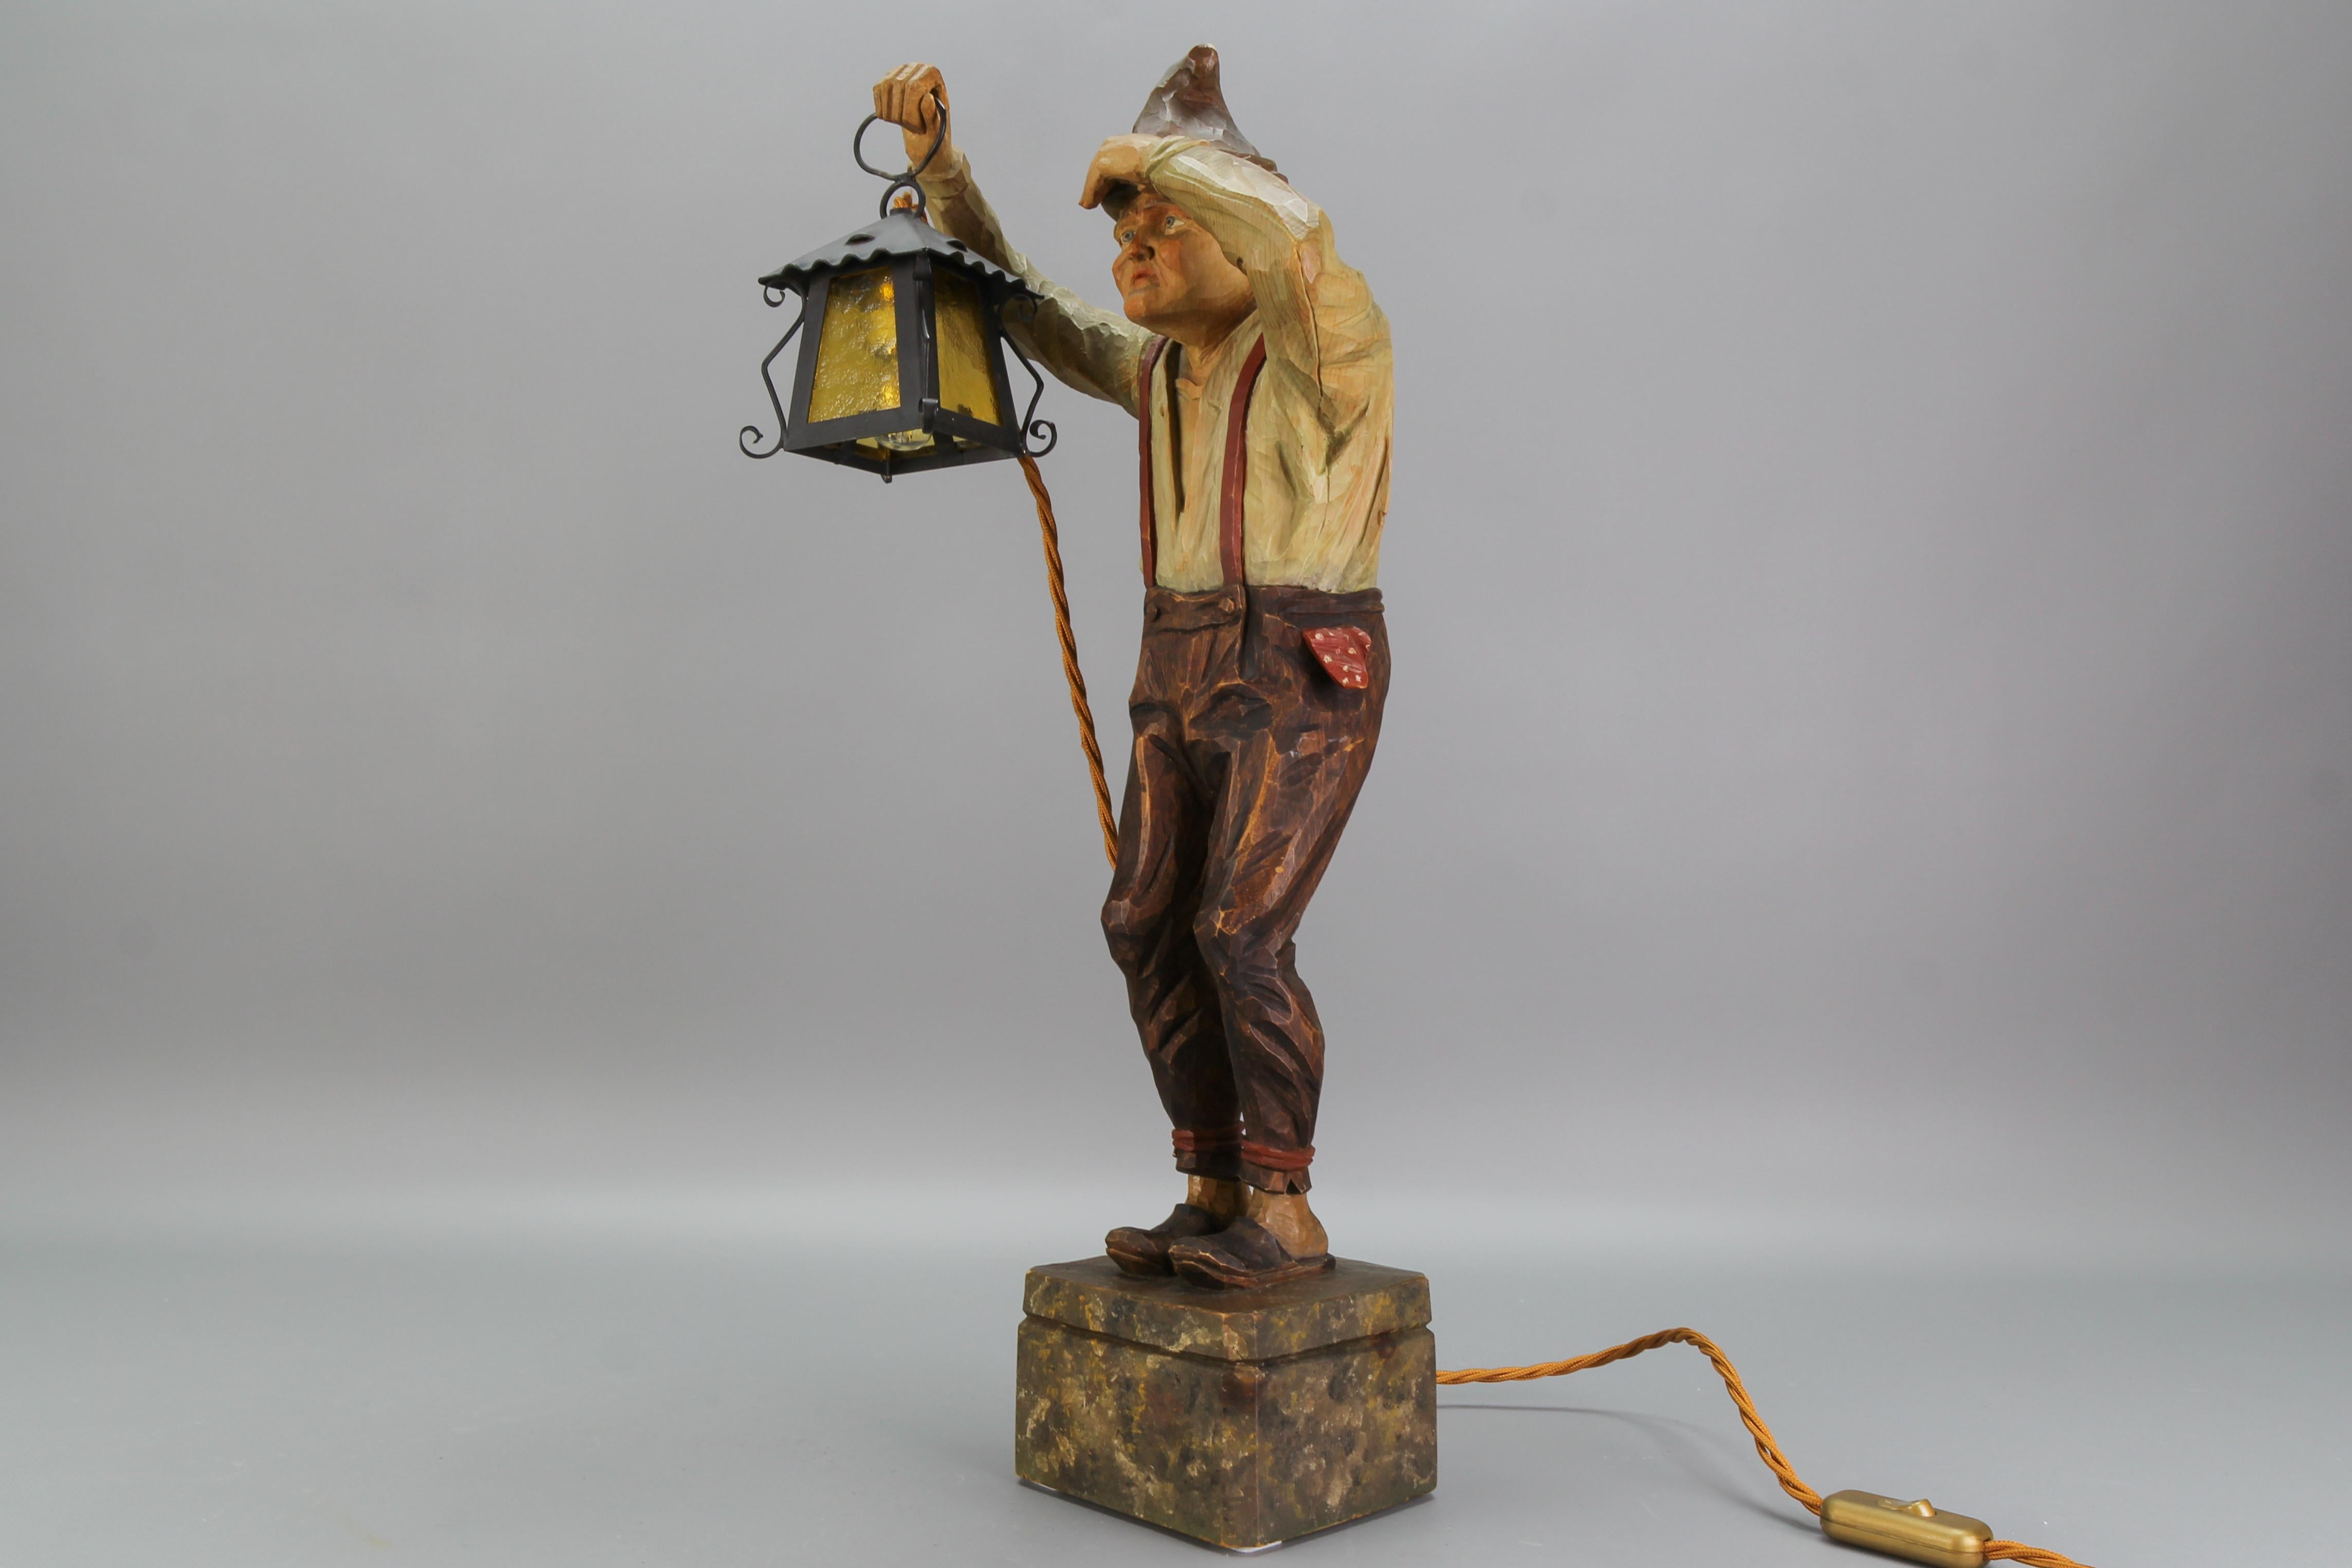 Large Hand-Carved Wooden Lamp Sculpture Man with a Lantern, Germany, 1930s For Sale 1